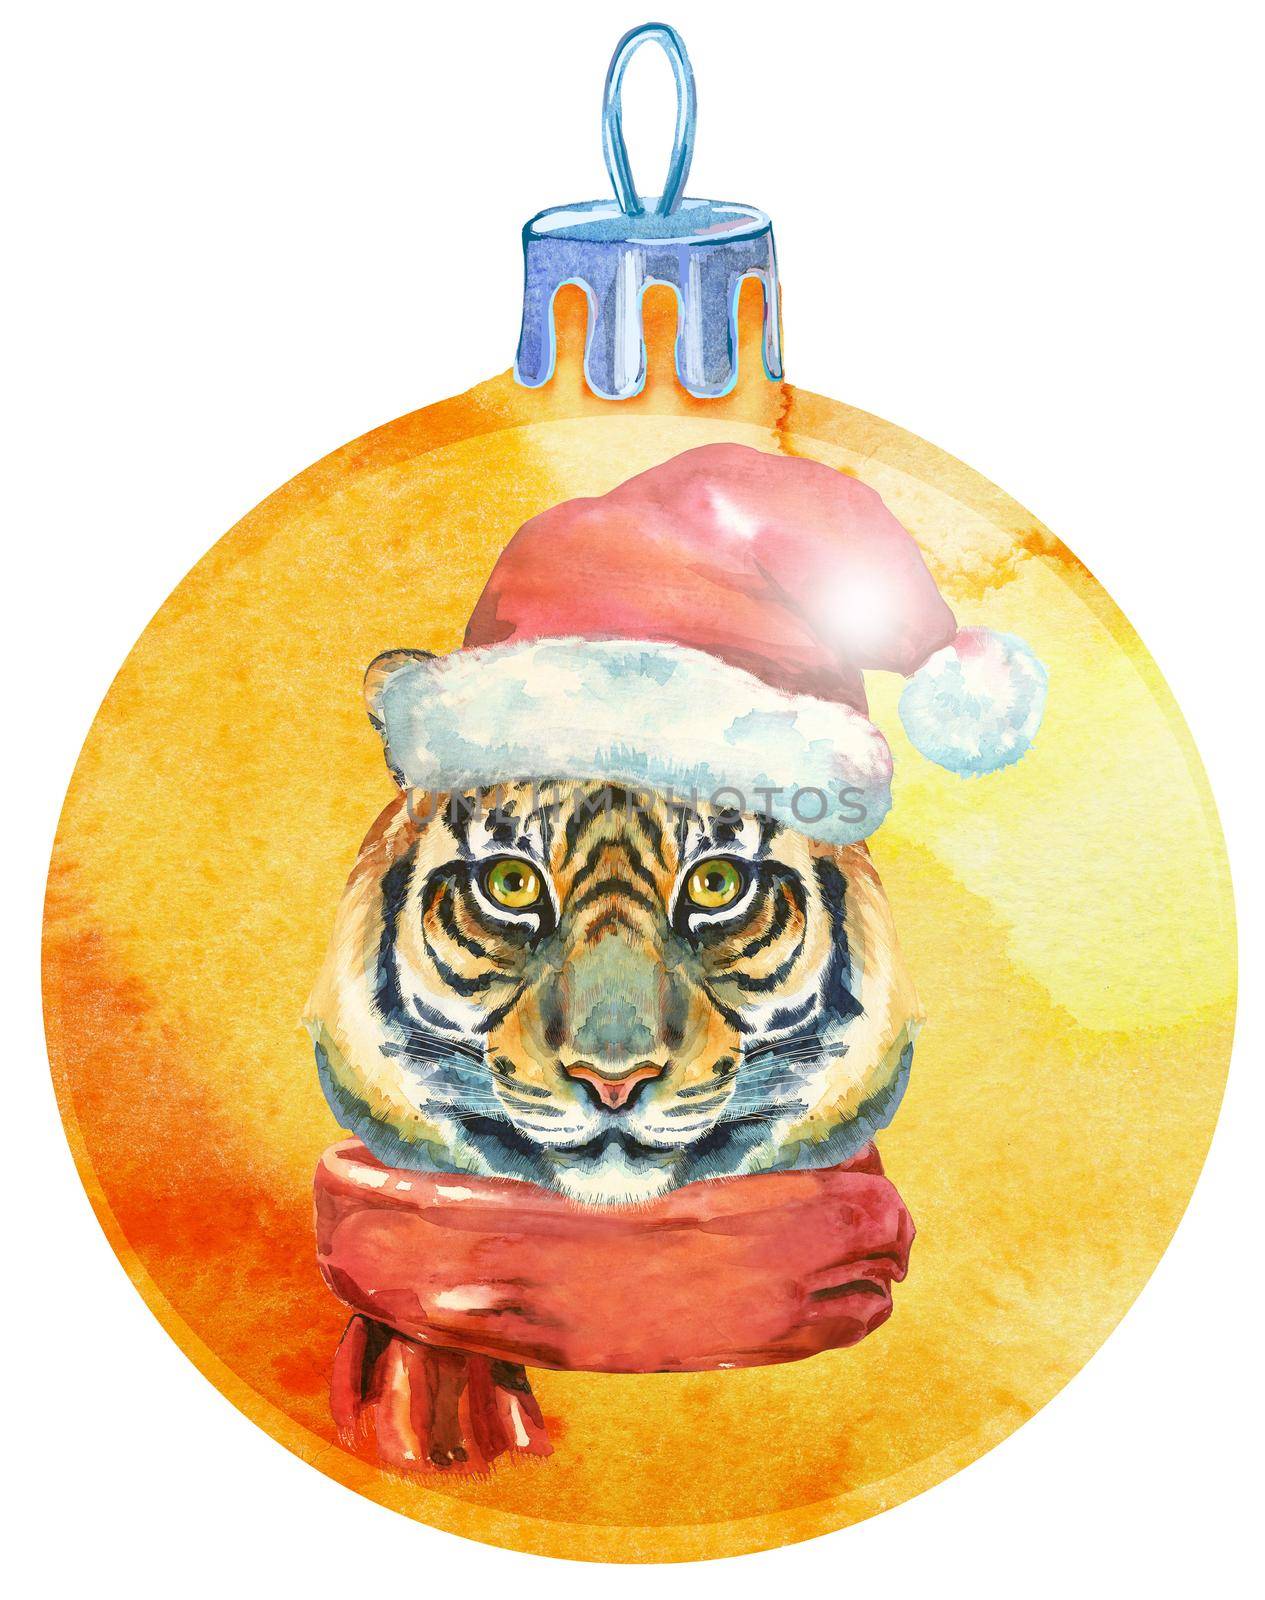 Watercolor Christmas ball with tiger isolated on a white background.